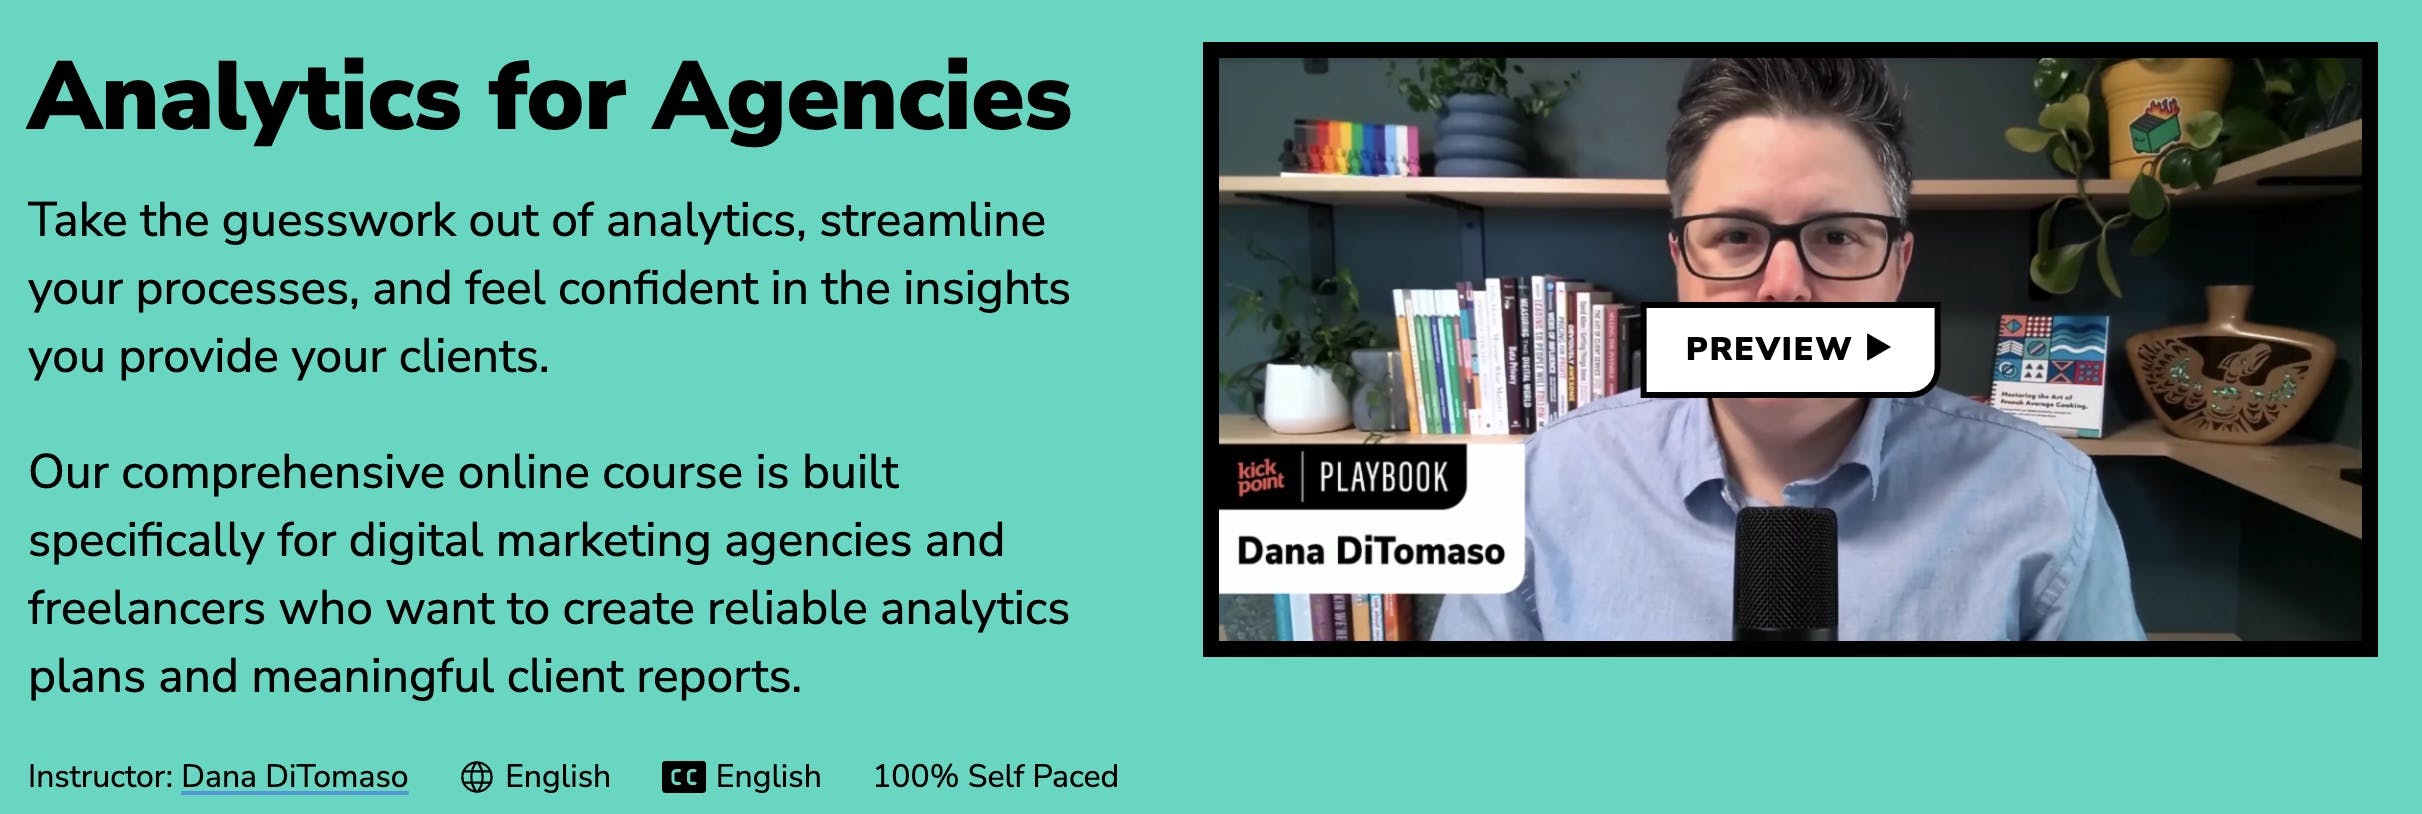 Two Accesses to Dana DiTomaso's Analytics for Agencies Online Course